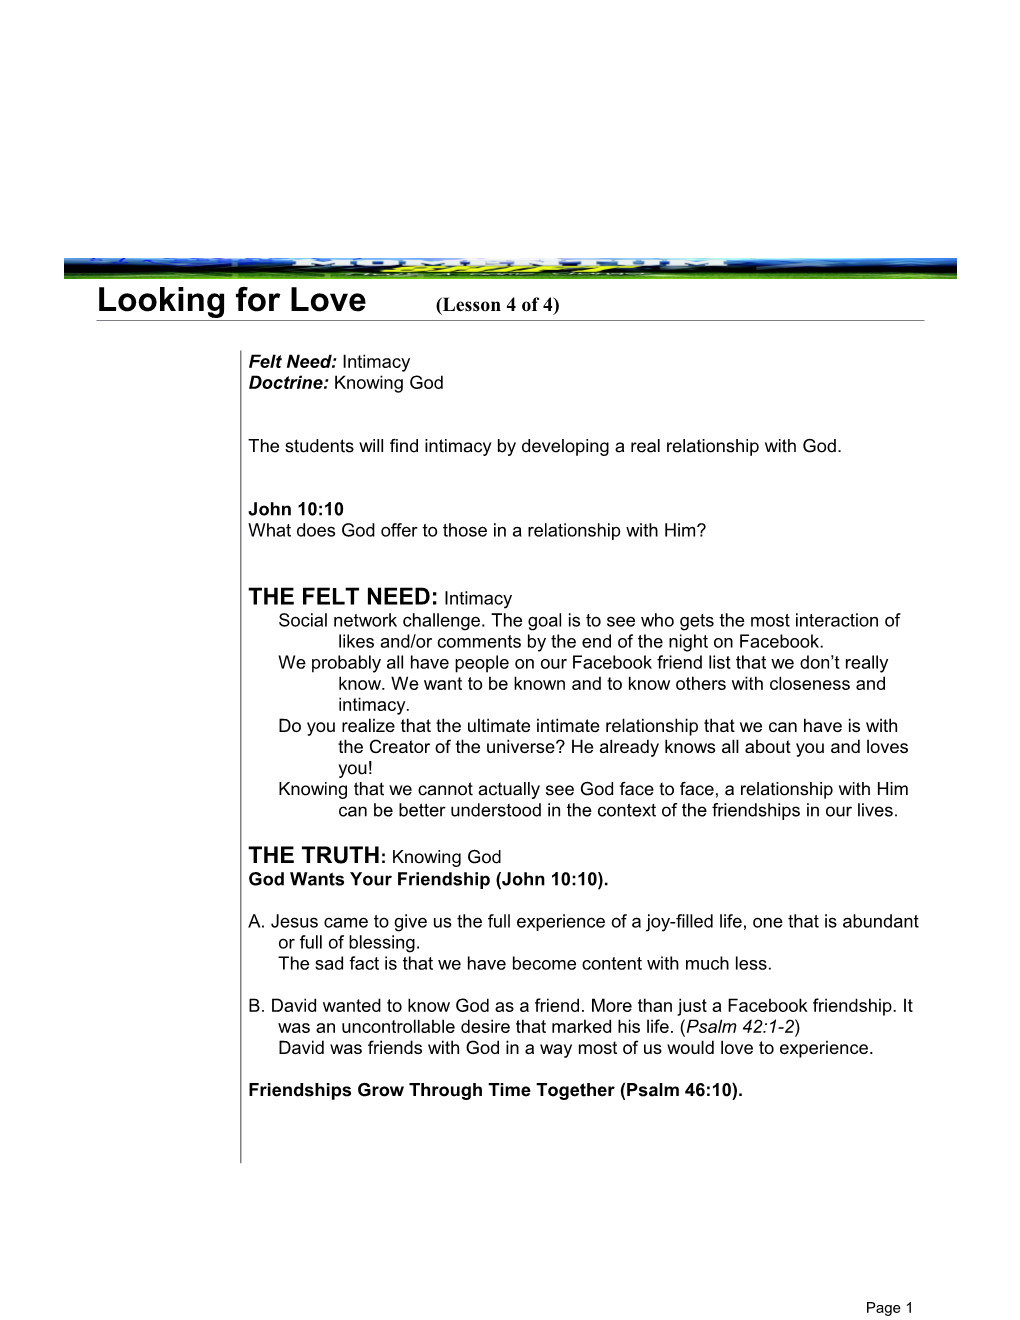 Looking for Love(Lesson 4 of 4)